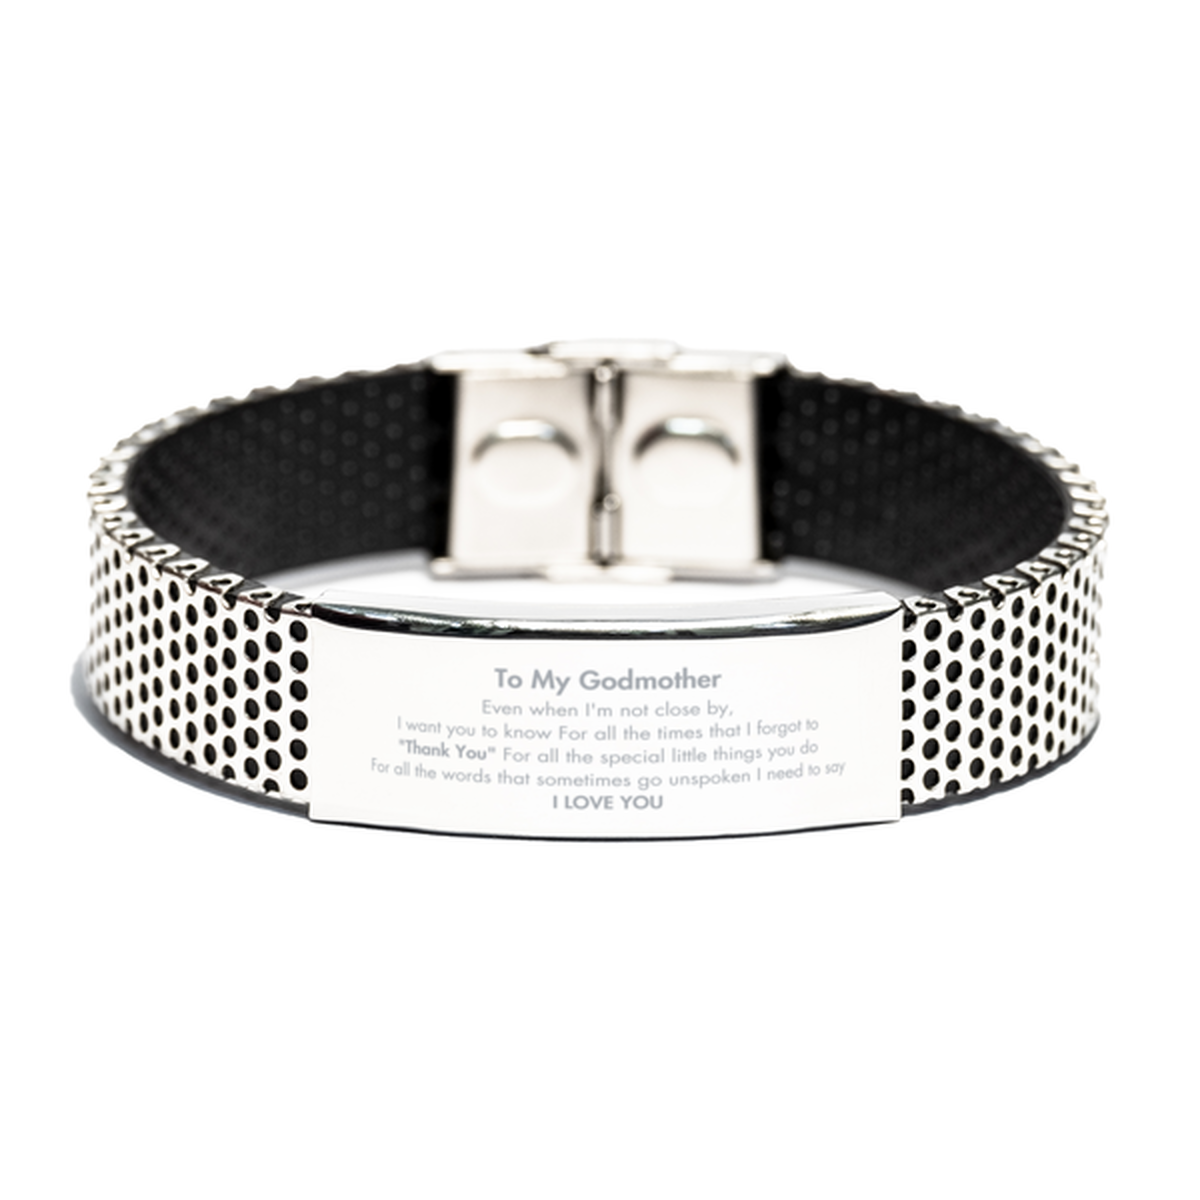 Thank You Gifts for Godmother, Keepsake Stainless Steel Bracelet Gifts for Godmother Birthday Mother's day Father's Day Godmother For all the words That sometimes go unspoken I need to say I LOVE YOU